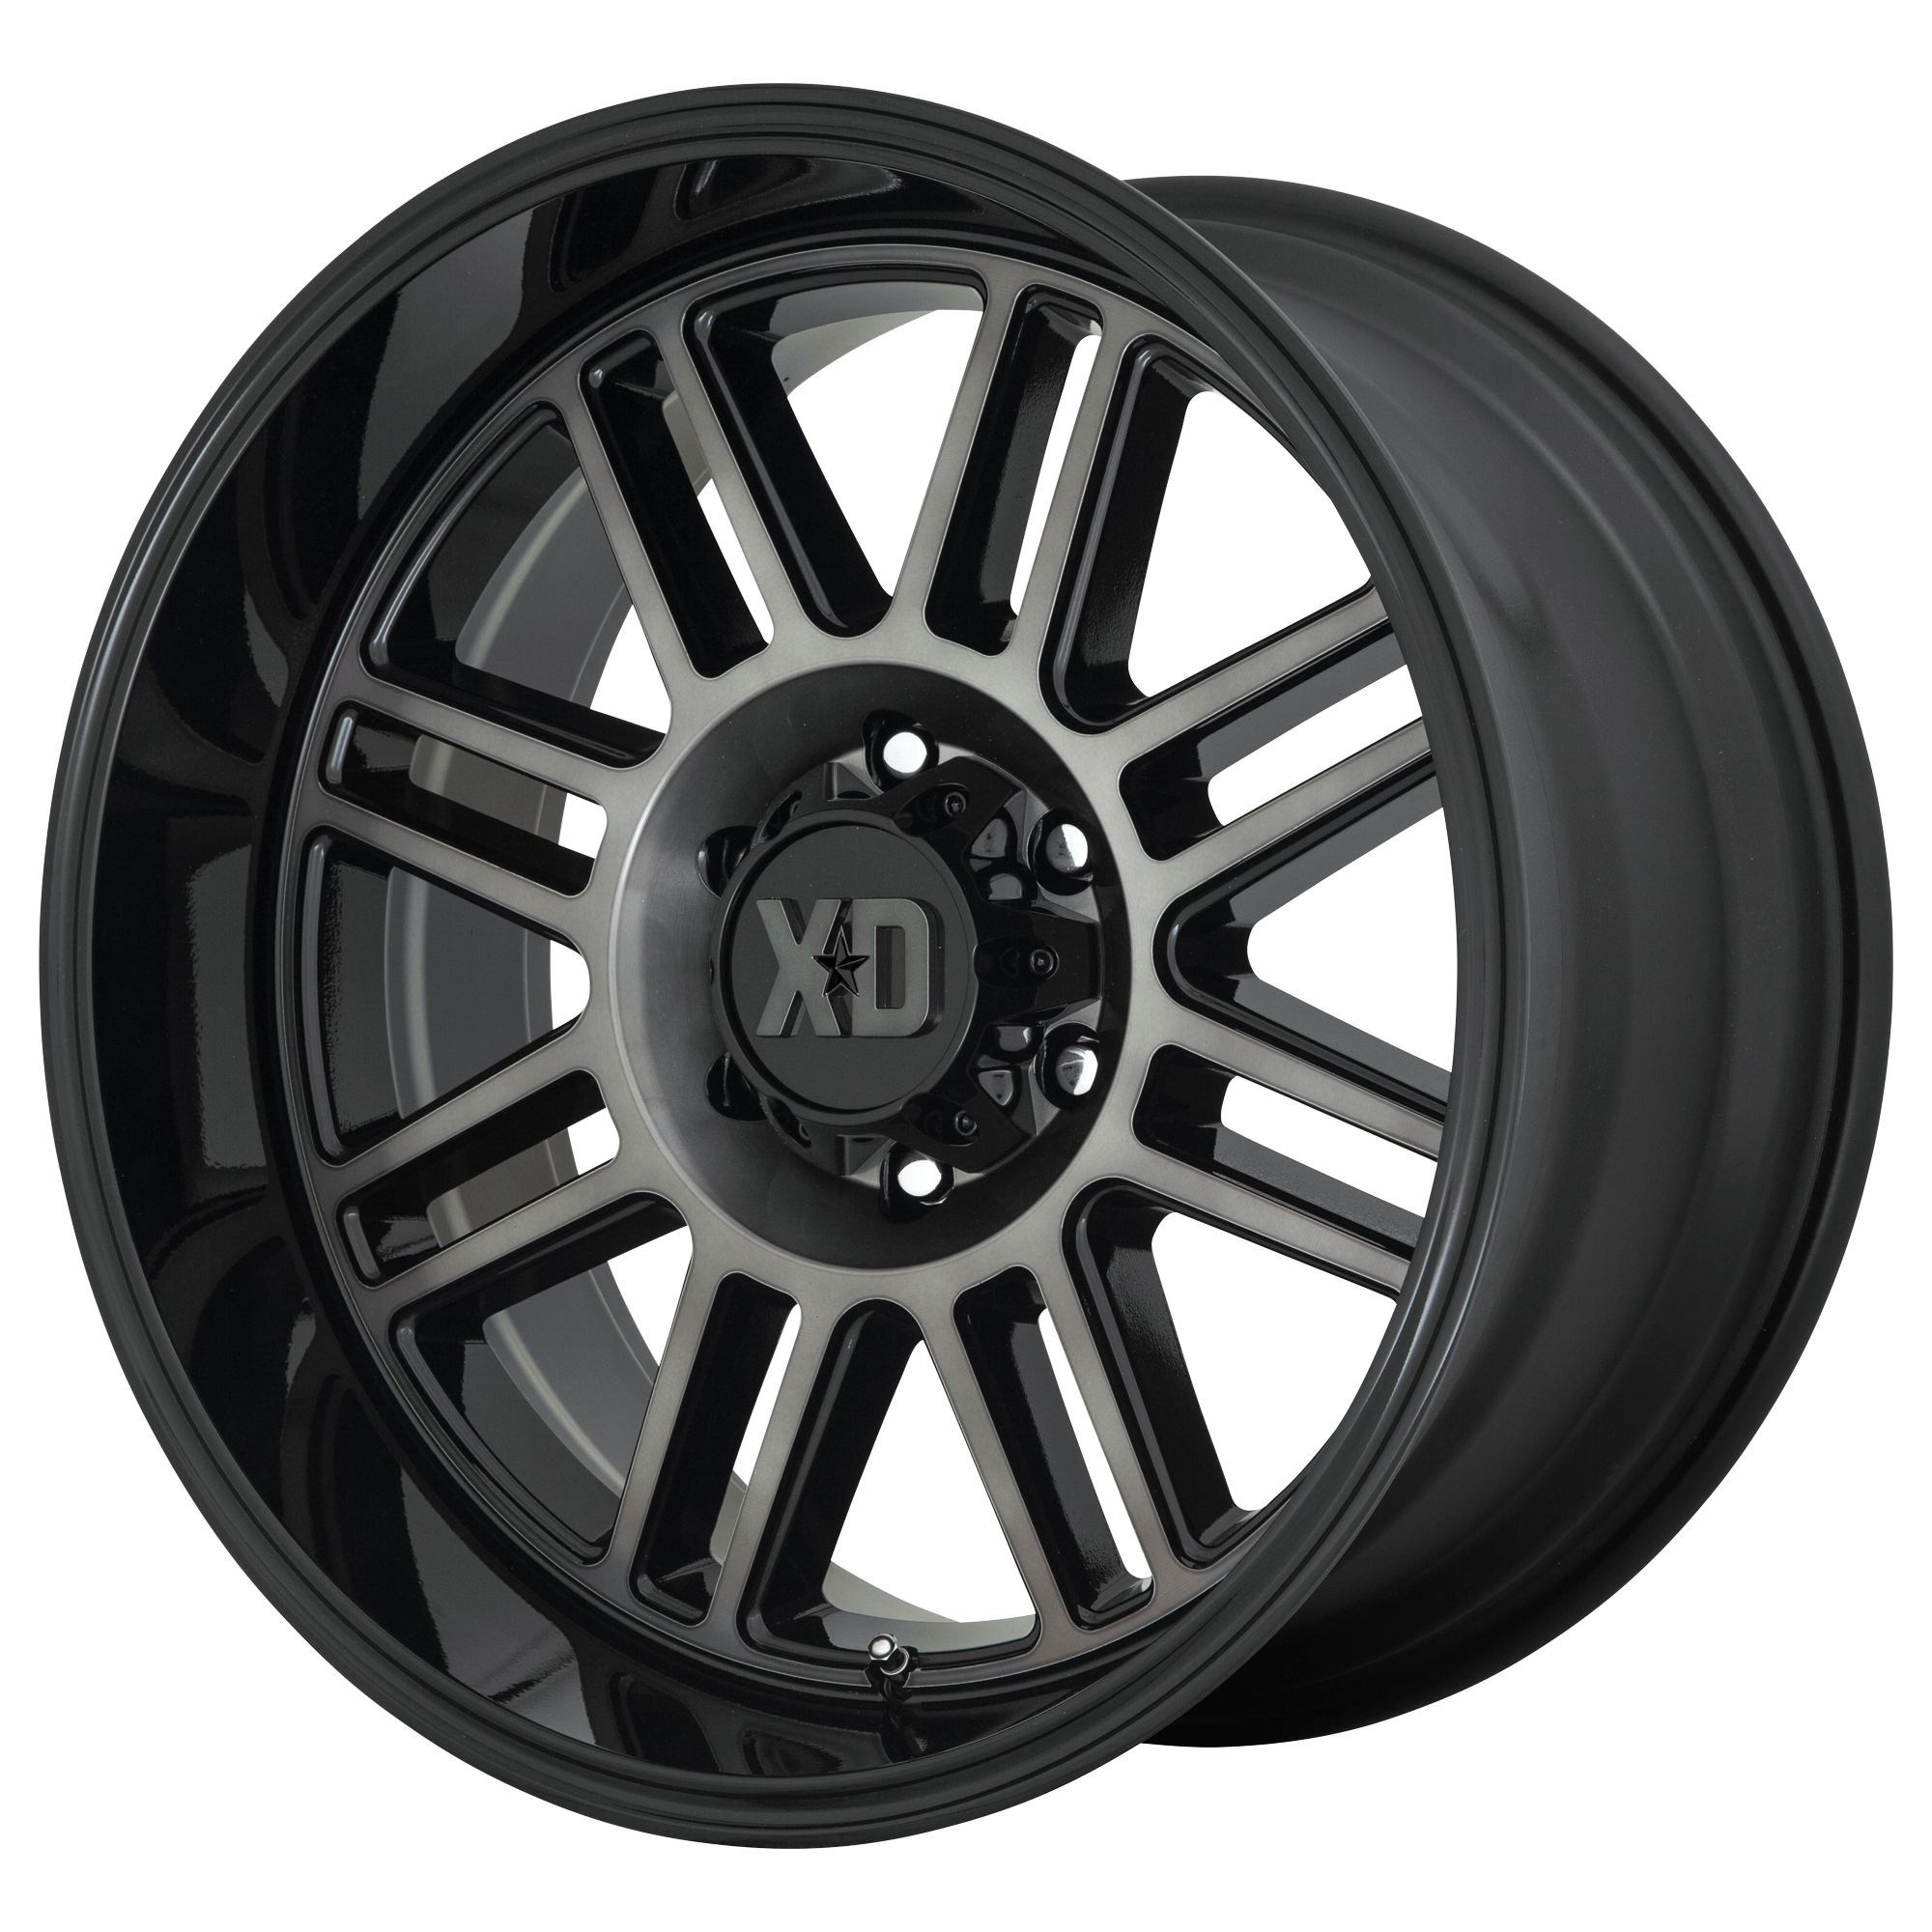 CAGE 22x10 6x135.00 GLOSS BLACK W/ GRAY TINT (-18 mm) - Tires and Engine Performance